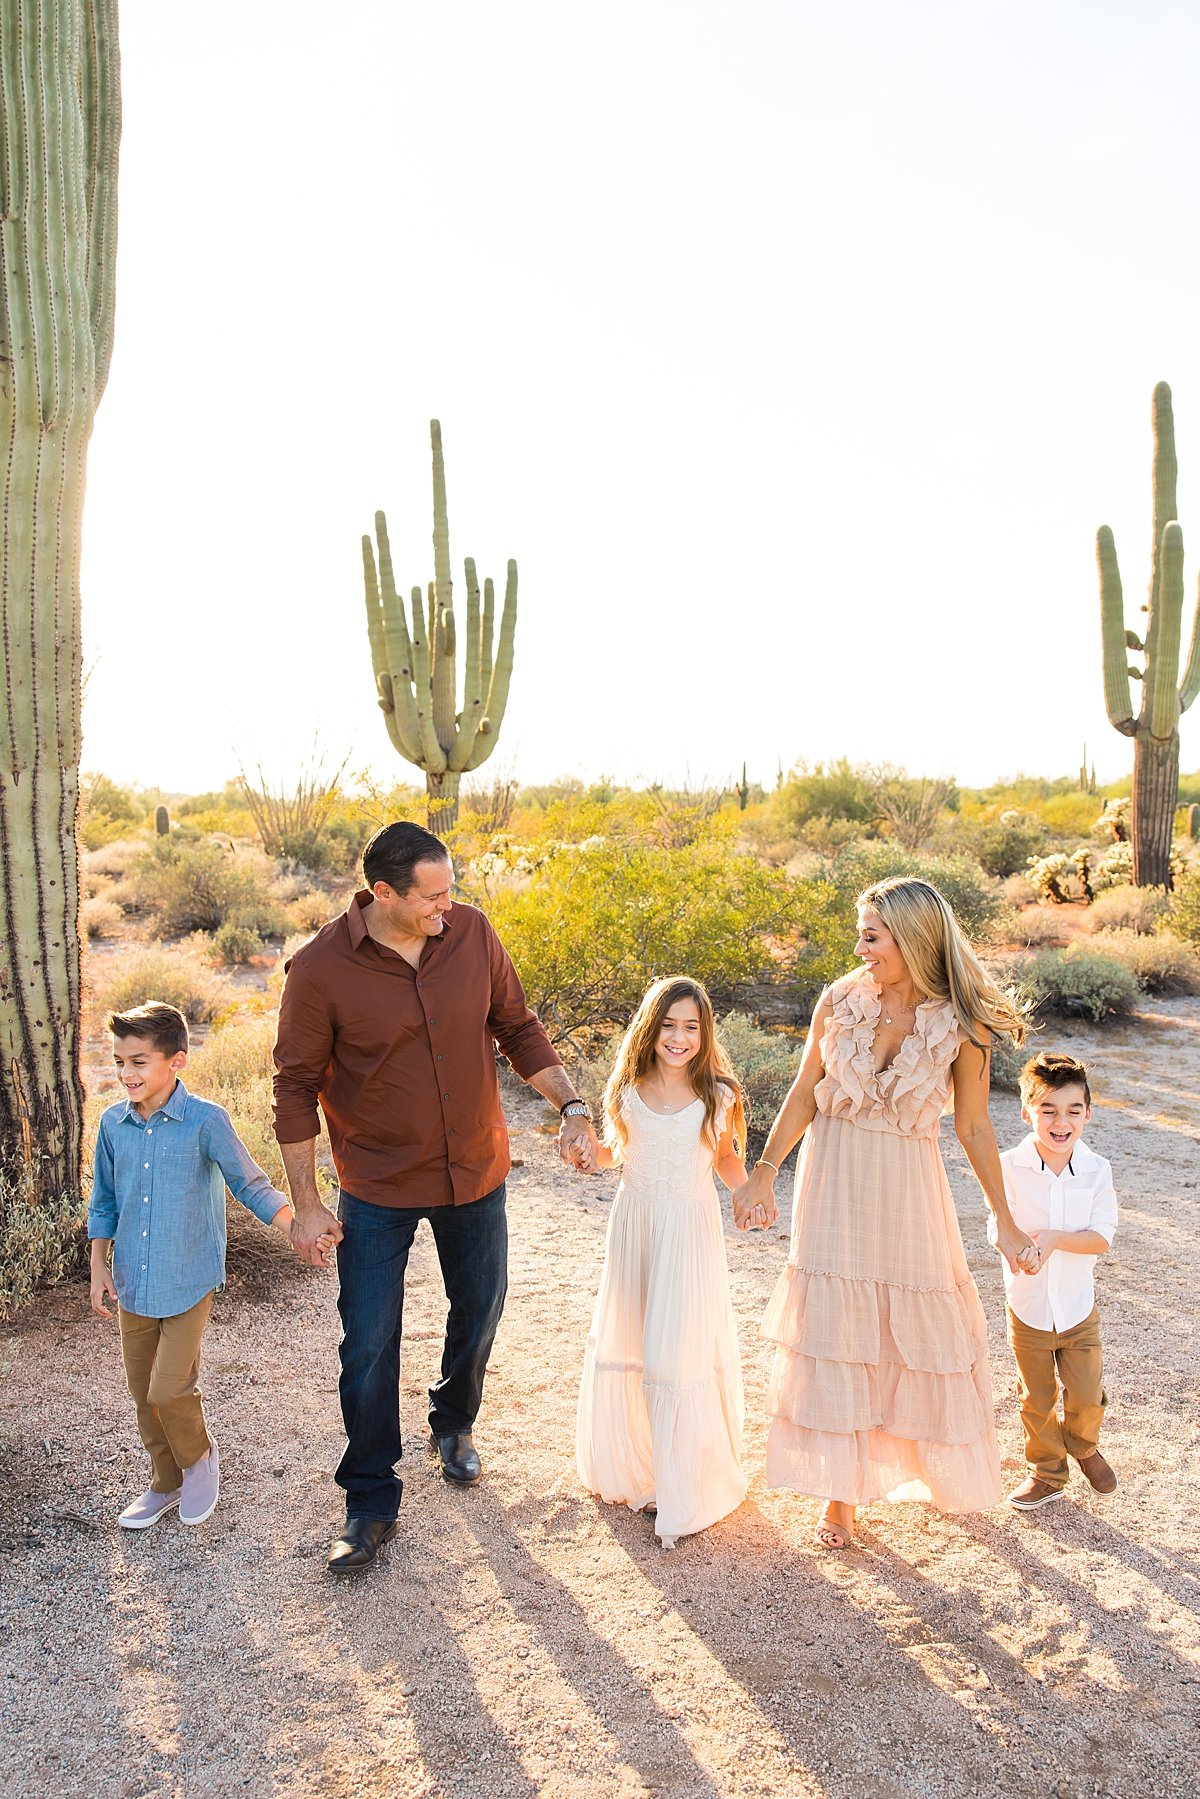 Leah Hope Photography | Scottsdale Arizona Family Photographer | Phoenix Arizona Family Pictures | Desert Landscape Cactus Mountains Scenery | Sunset Natural Light | What to Wear | How to Pose | Family Poses | Styling Outfits for Pictures | Family Photos | Family Posing Ideas | Family Color Scheme Palette | Coordinating Outfits | Golden Hour Sunlight | Family Photo Shoot Outfit Inspiration